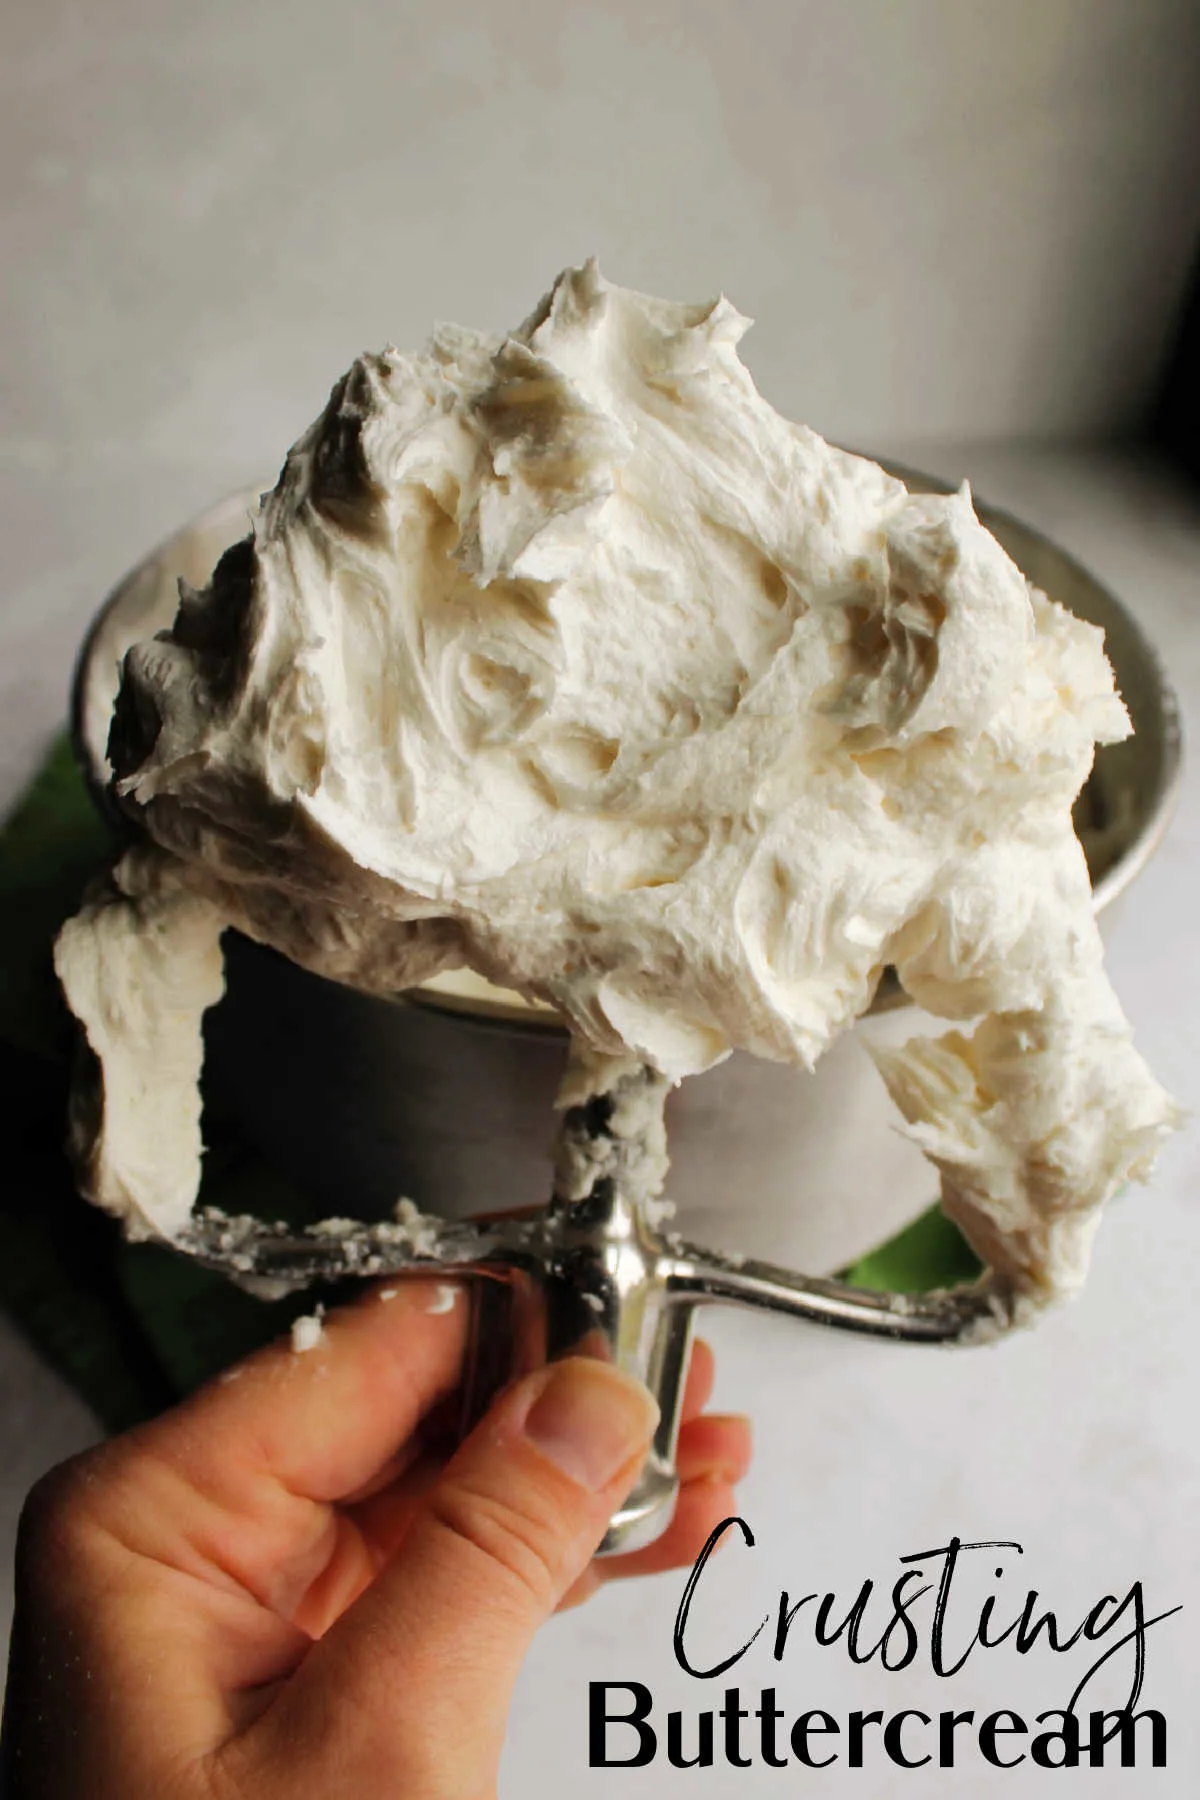 If you need a frosting with staying power, crusting buttercream is it! You can easily adjust its consistency making it perfect for spreading or piping. It is also great for using with your Russian piping tips. This is a recipe you should definitely have on hand for decorating cakes and cookies.